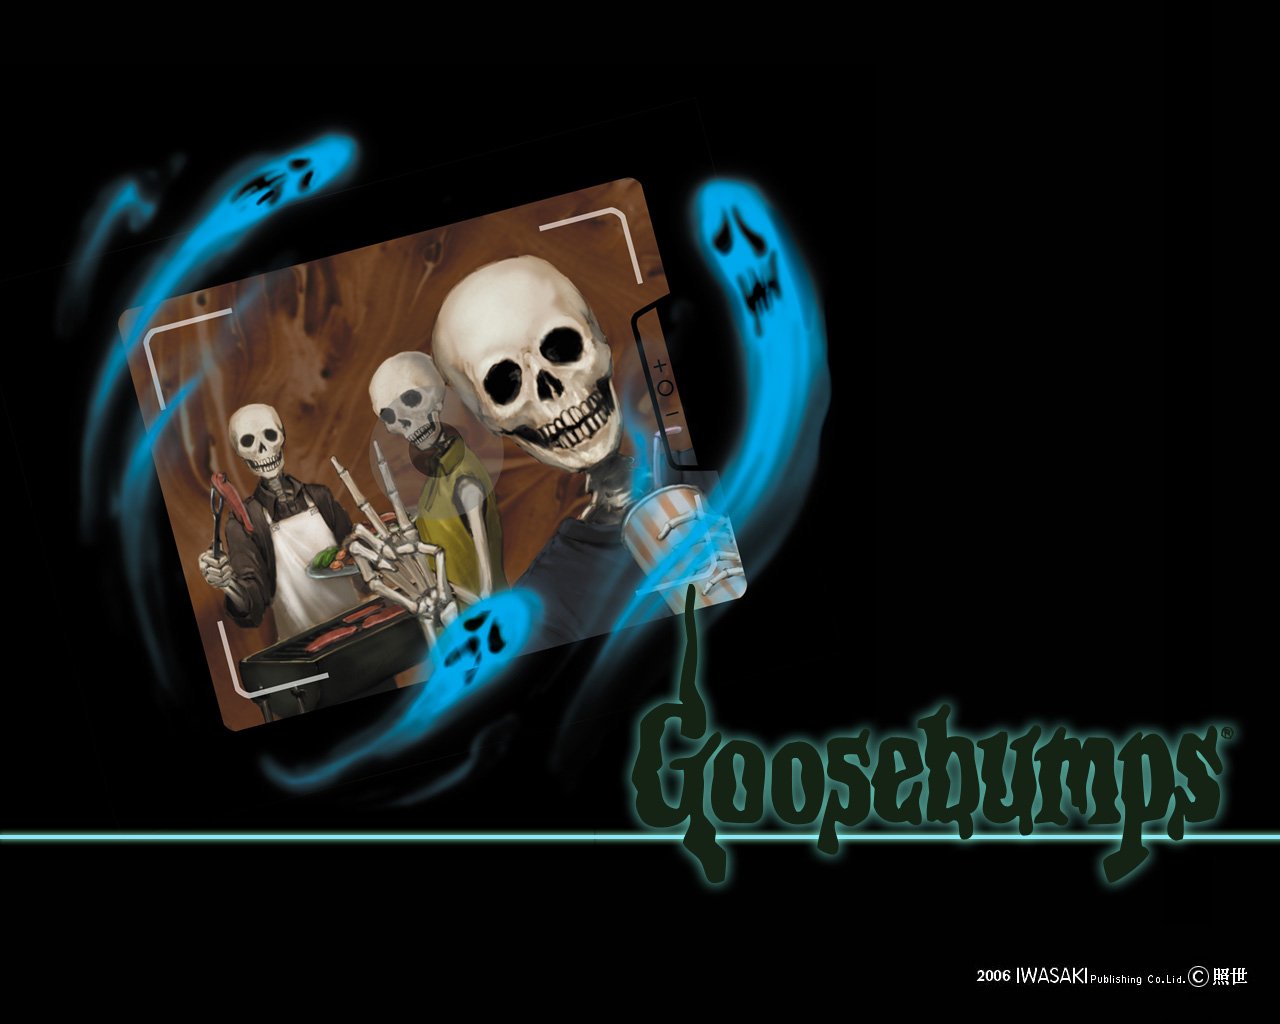 Goosebumps Wallpaper Pictures Photos And